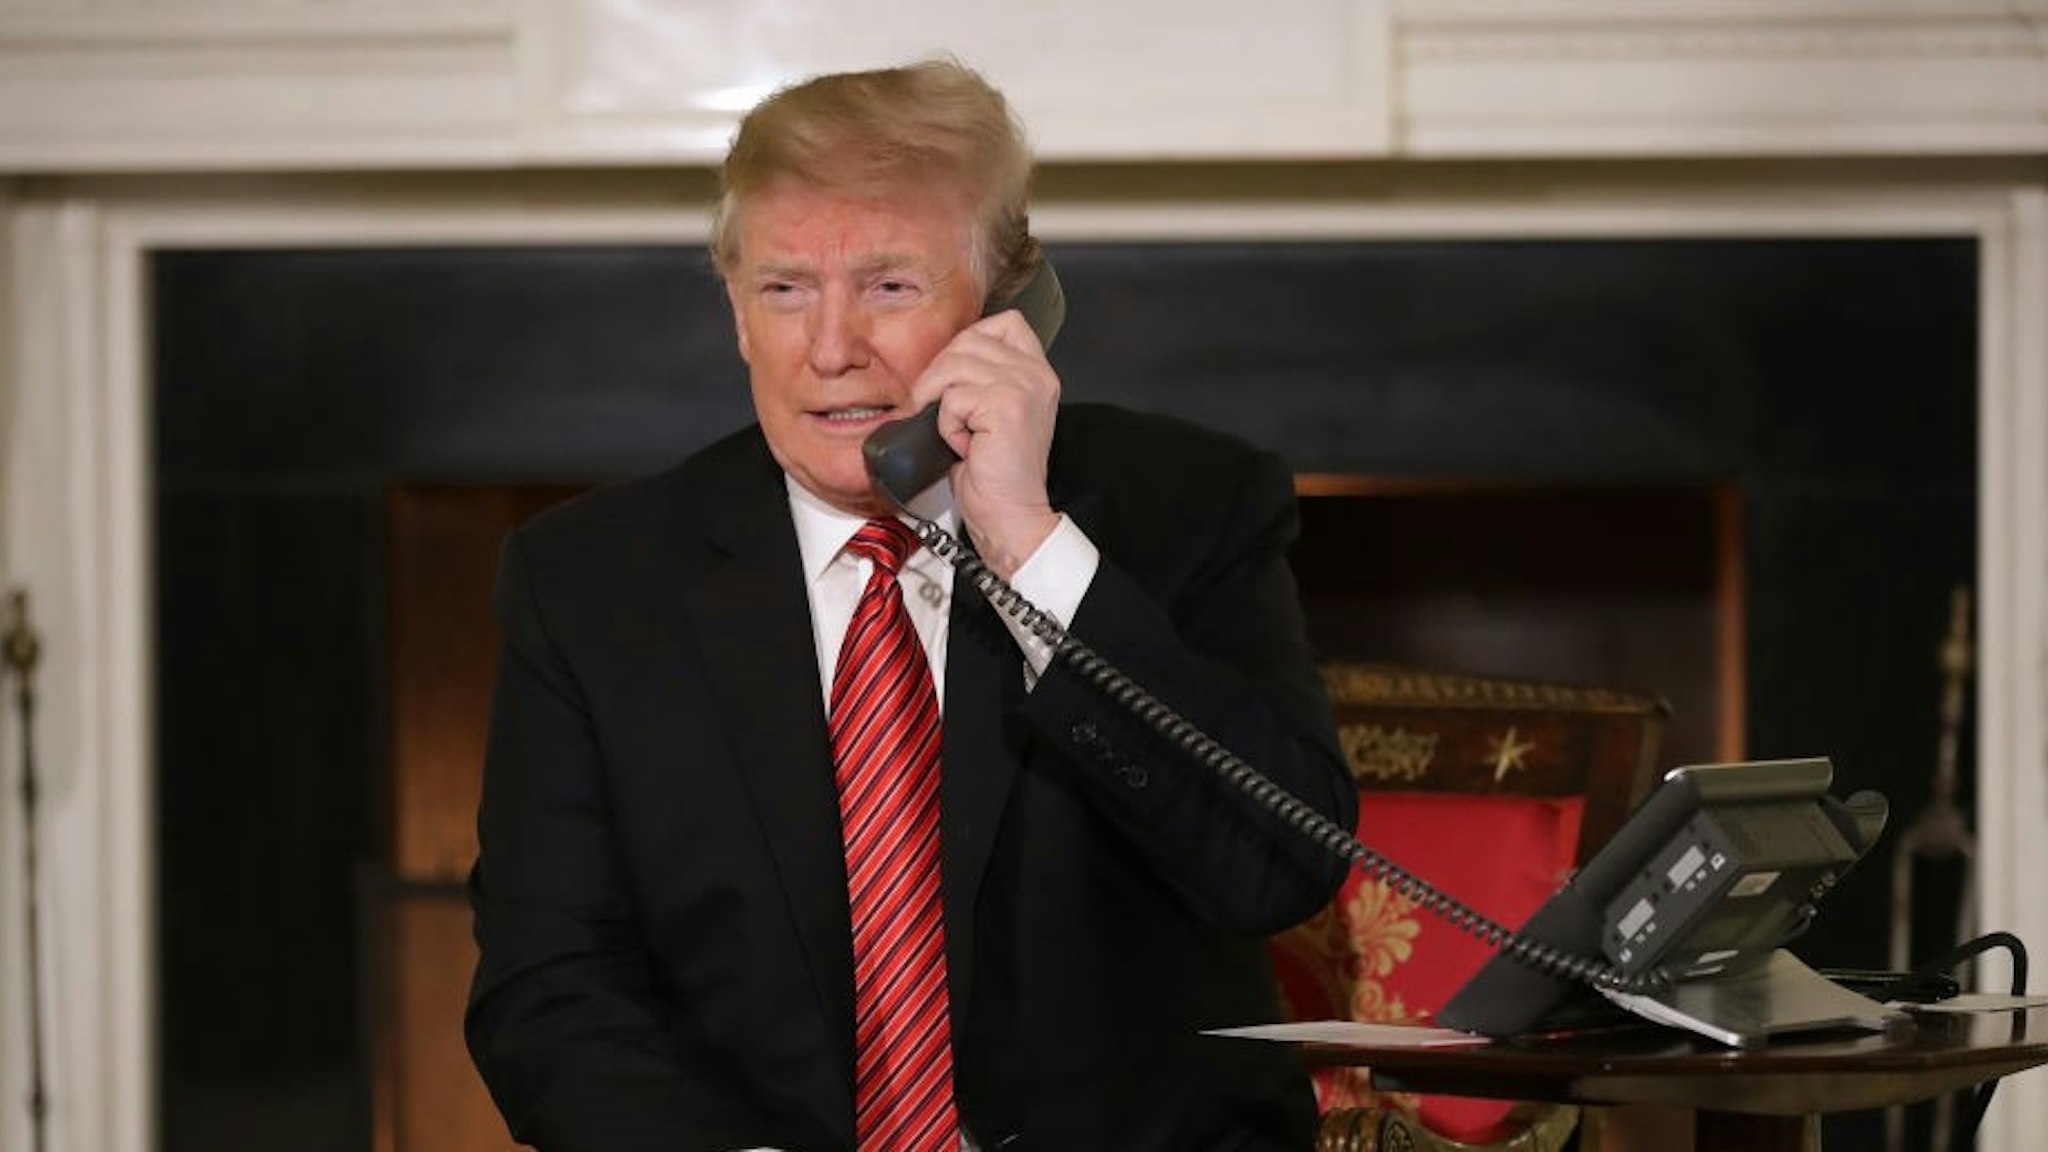 U.S. President Donald Trump takes phone calls from children as he participates in tracking Santa Claus' movements with the North American Aerospace Defense Command (NORAD) Santa Tracker on Christmas Eve in the East Room of the White House December 24, 2018 in Washington, DC. This is the 63rd straight year that NORAD has publicly tracked Santa’s sleigh on its global rounds.